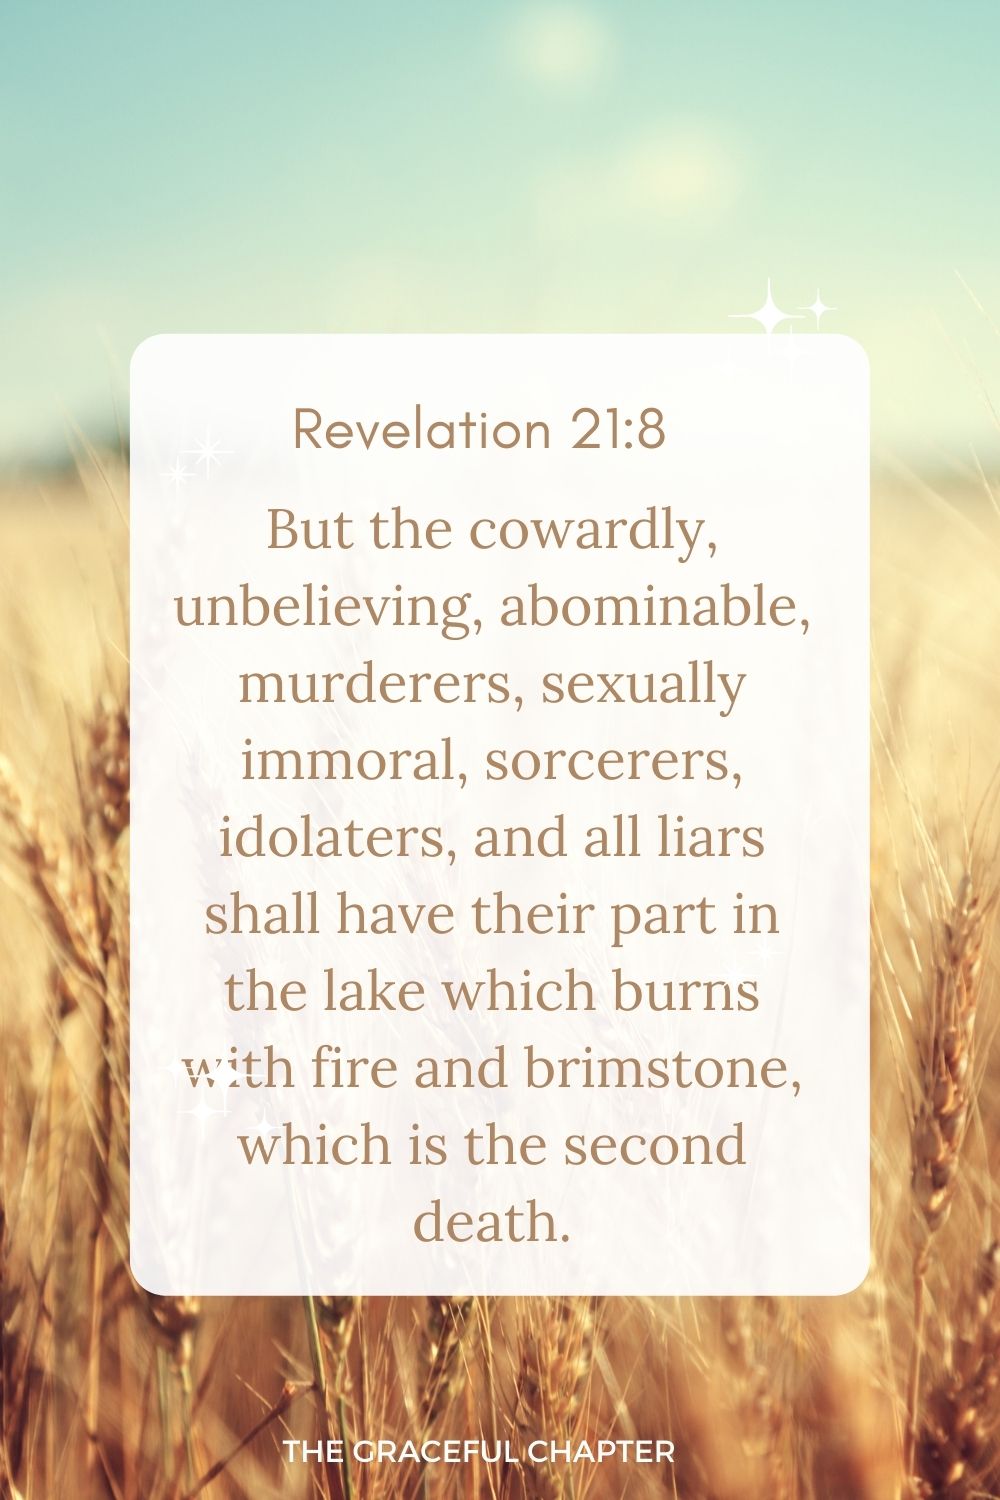 But the cowardly, unbelieving, abominable, murderers, sexually immoral, sorcerers, idolaters, and all liars shall have their part in the lake which burns with fire and brimstone, which is the second death.” Revelation 21:8